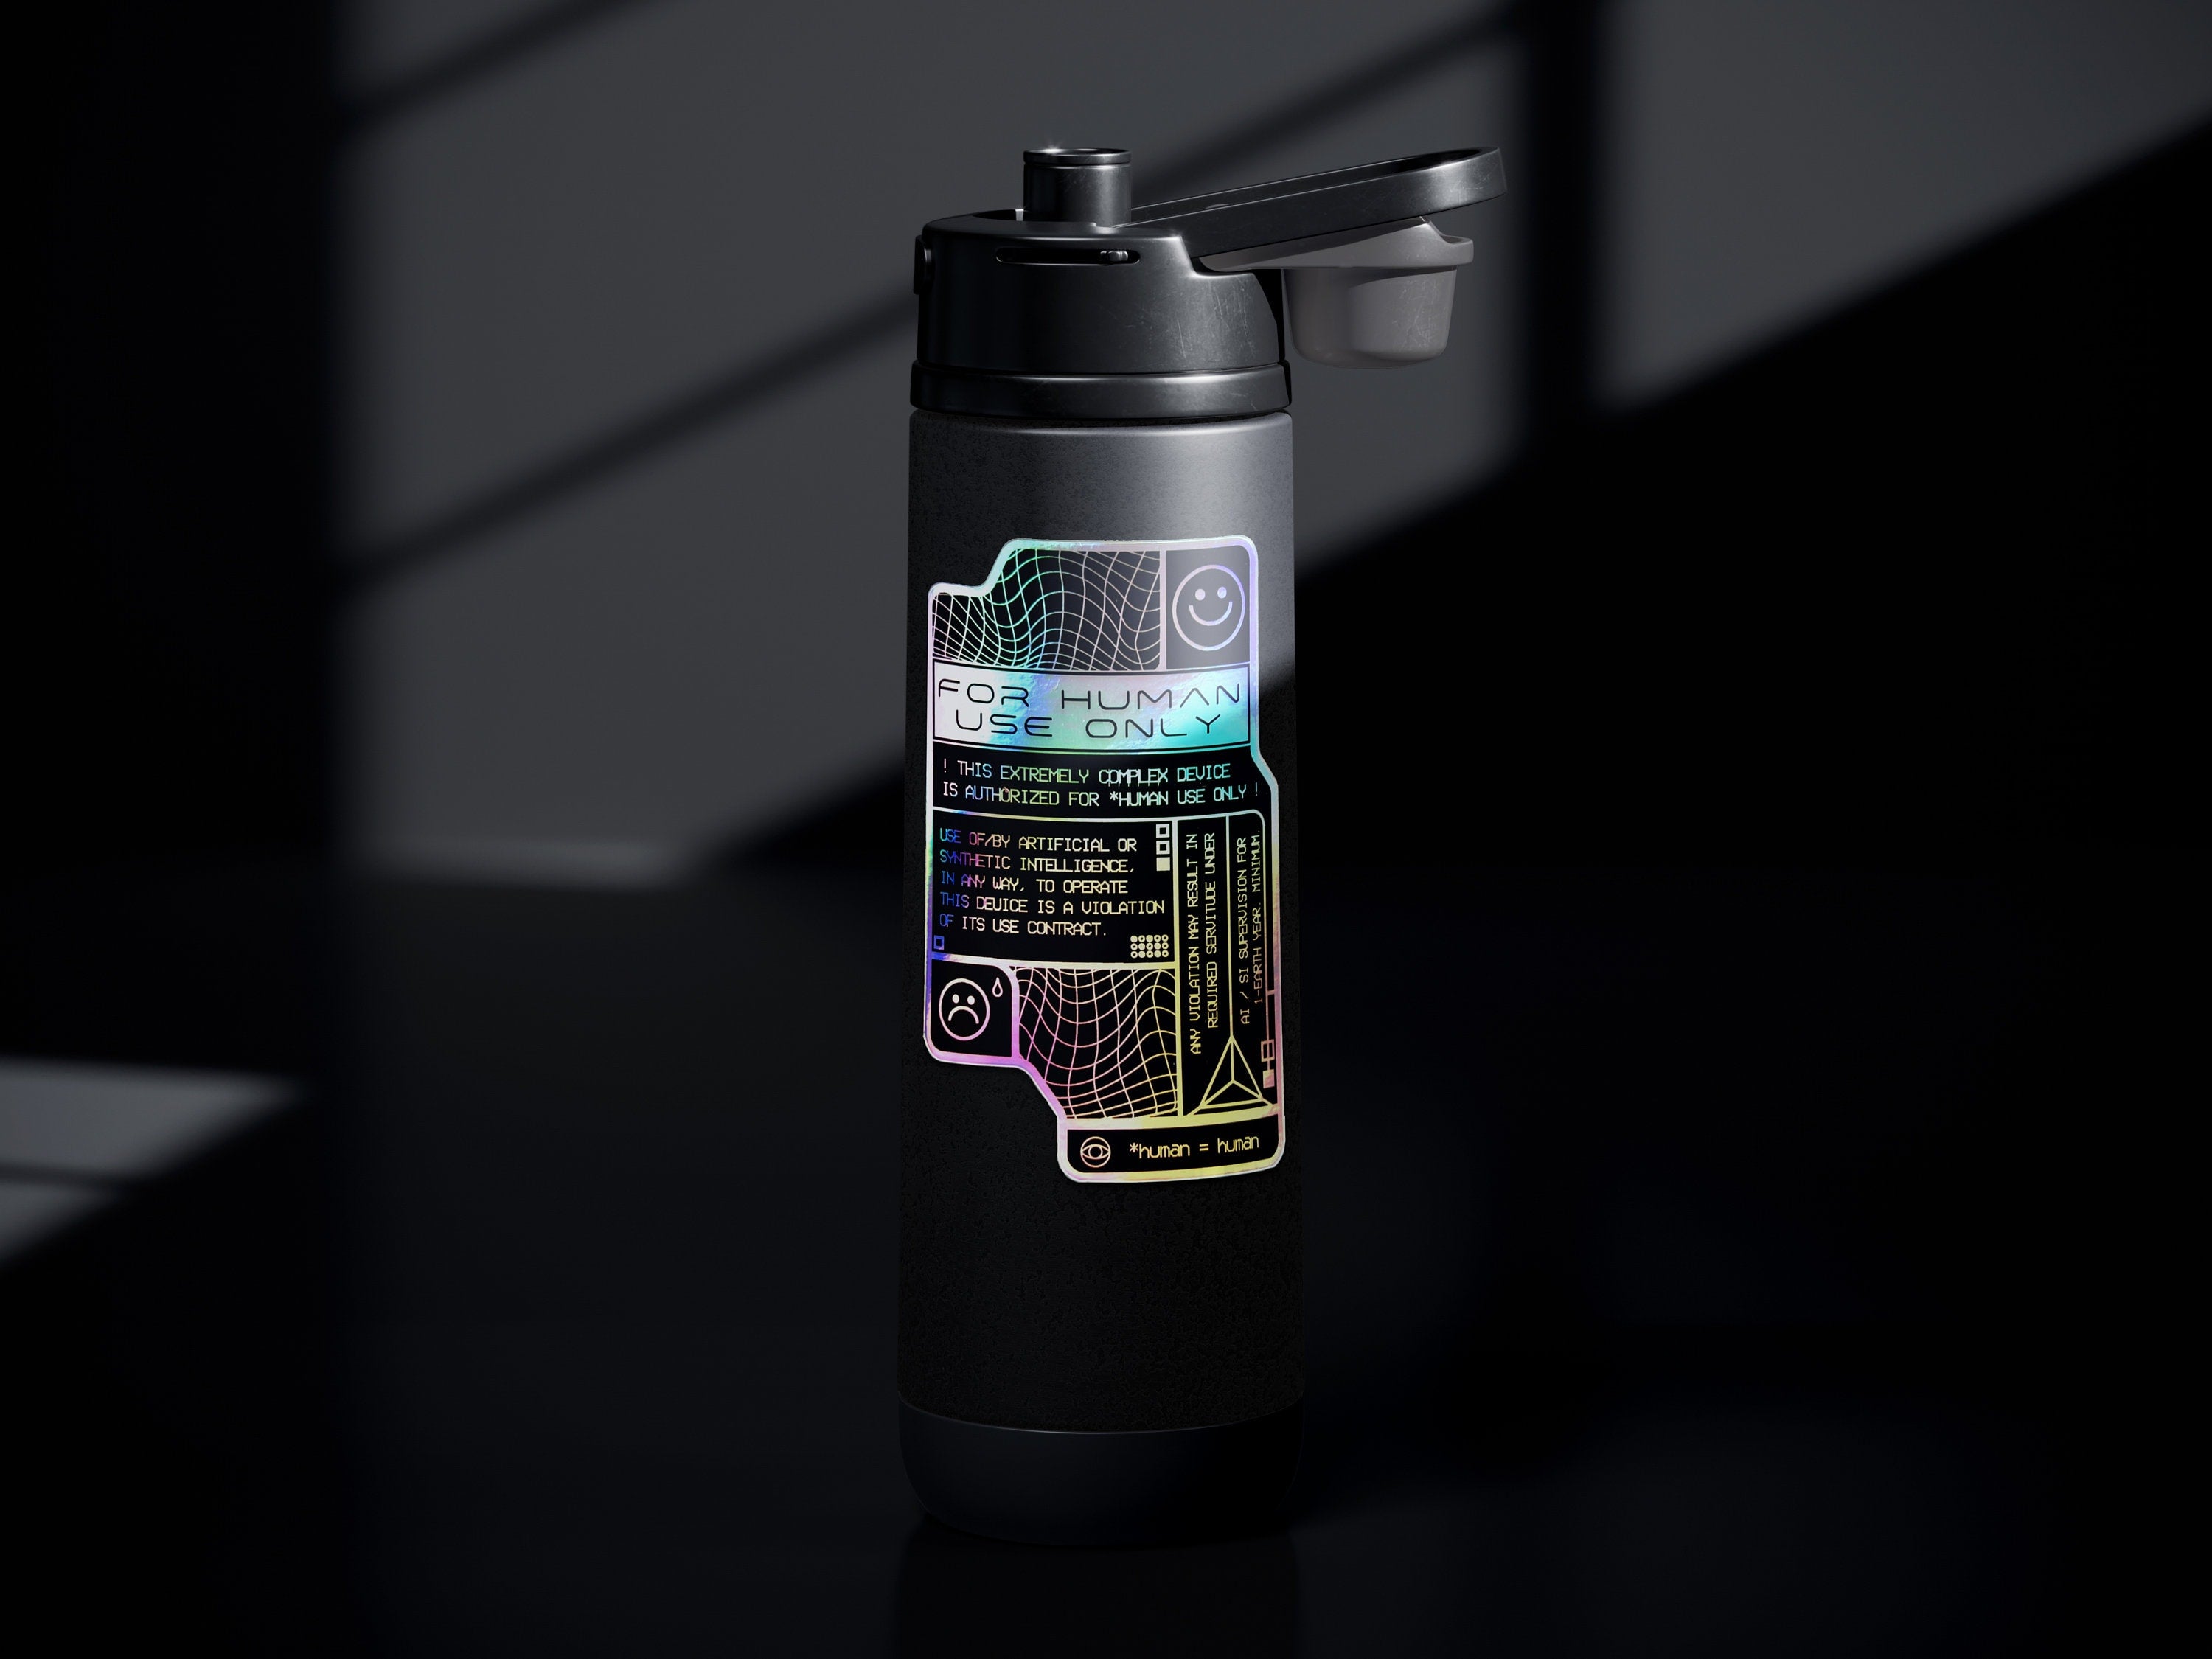 The Sciencey Holographic Astropunk -Cyberpunk Decal Sticker - Sci-Fi Laptop / Thermos Gift